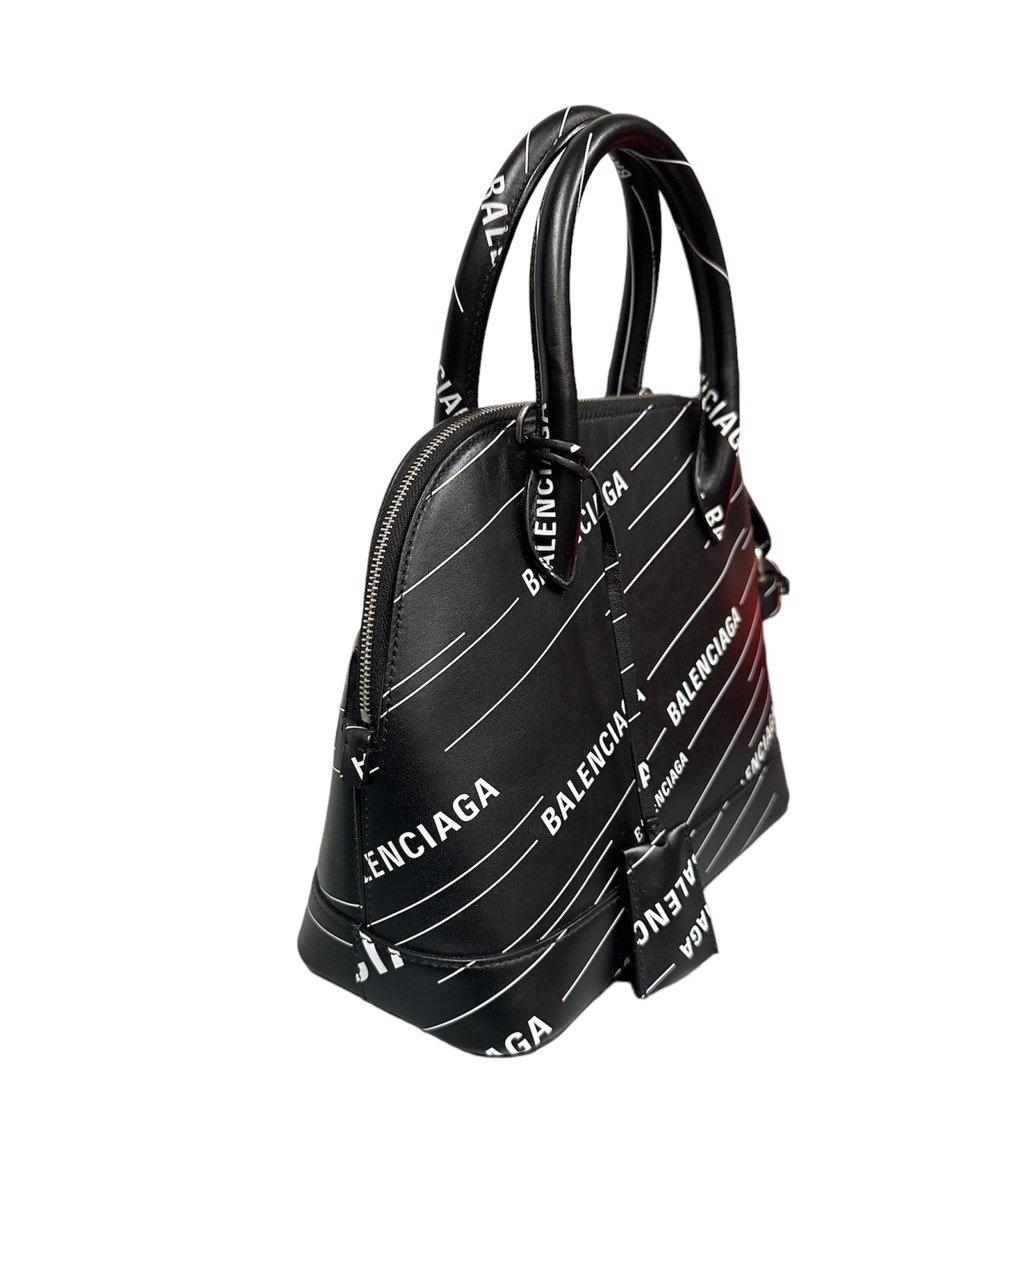 Balenciaga bag, Ville logo print model, made of black leather, white printed logo and silver hardware. Equipped with a double rigid handle in leather and a removable and adjustable shoulder strap to wear the bag by hand and on the shoulder.